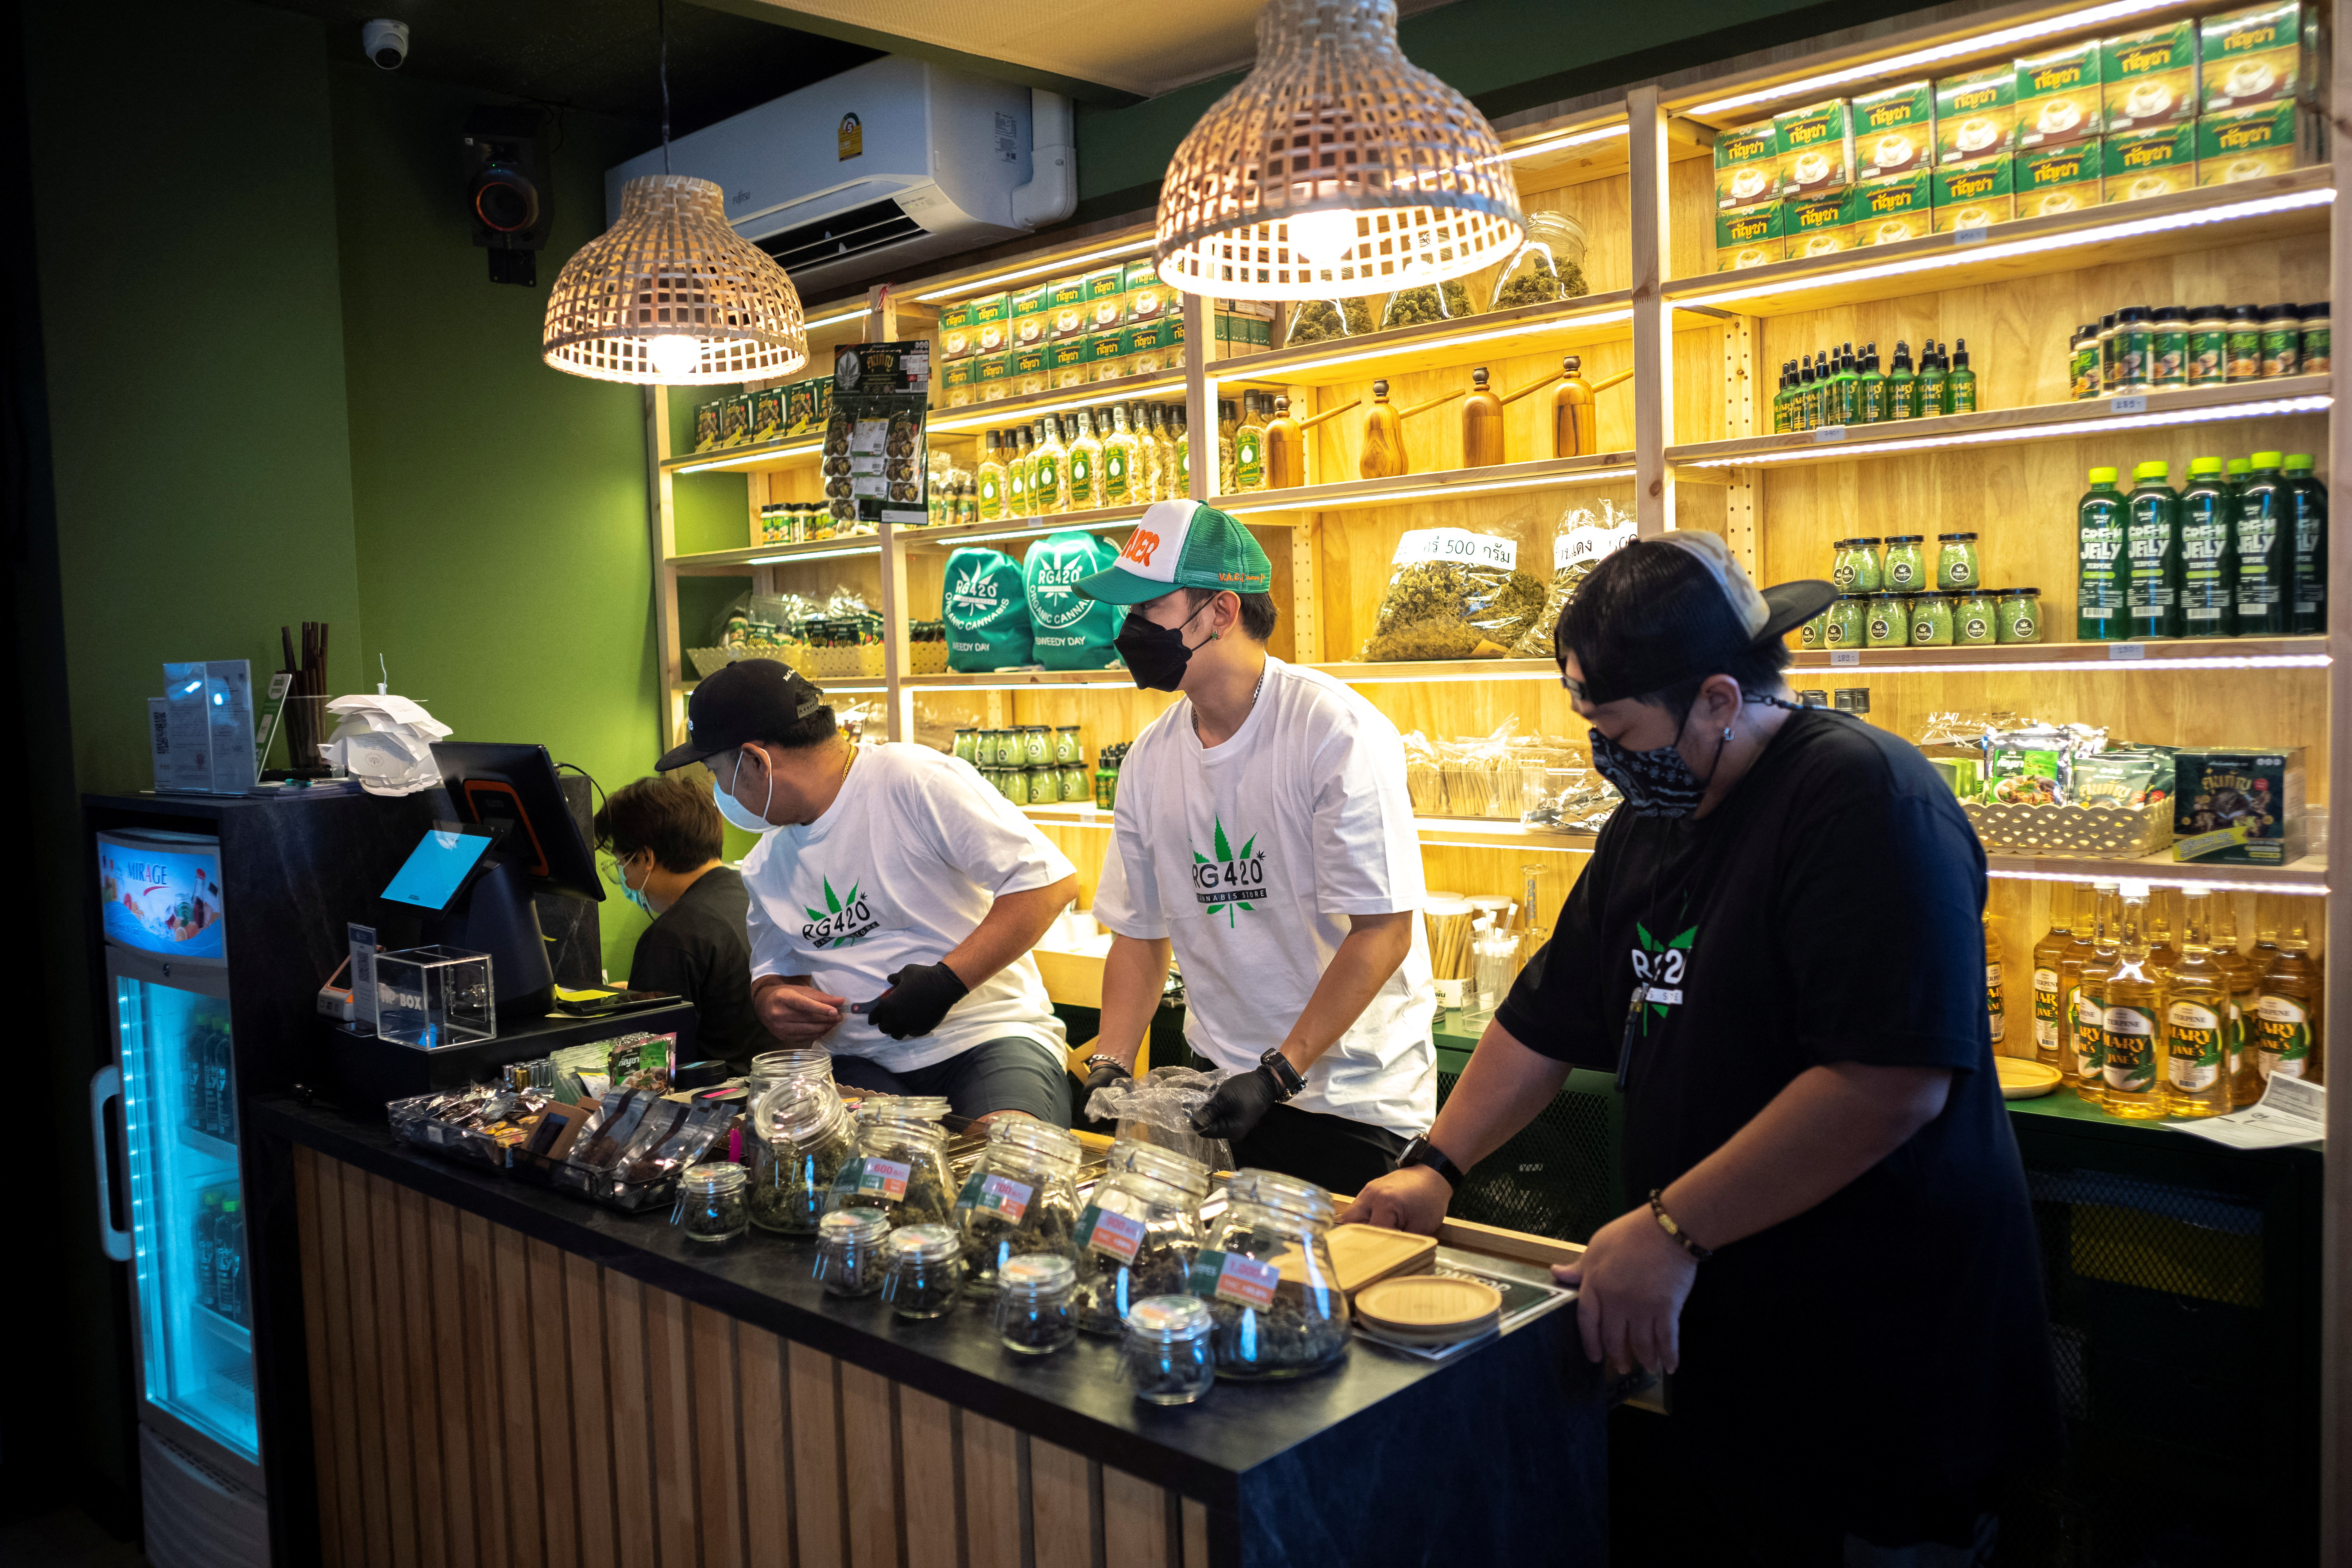 Staff members prepare cannabis at the RG420 cannabis store, at Khaosan Road, one of the favourite tourist spots in Bangkok